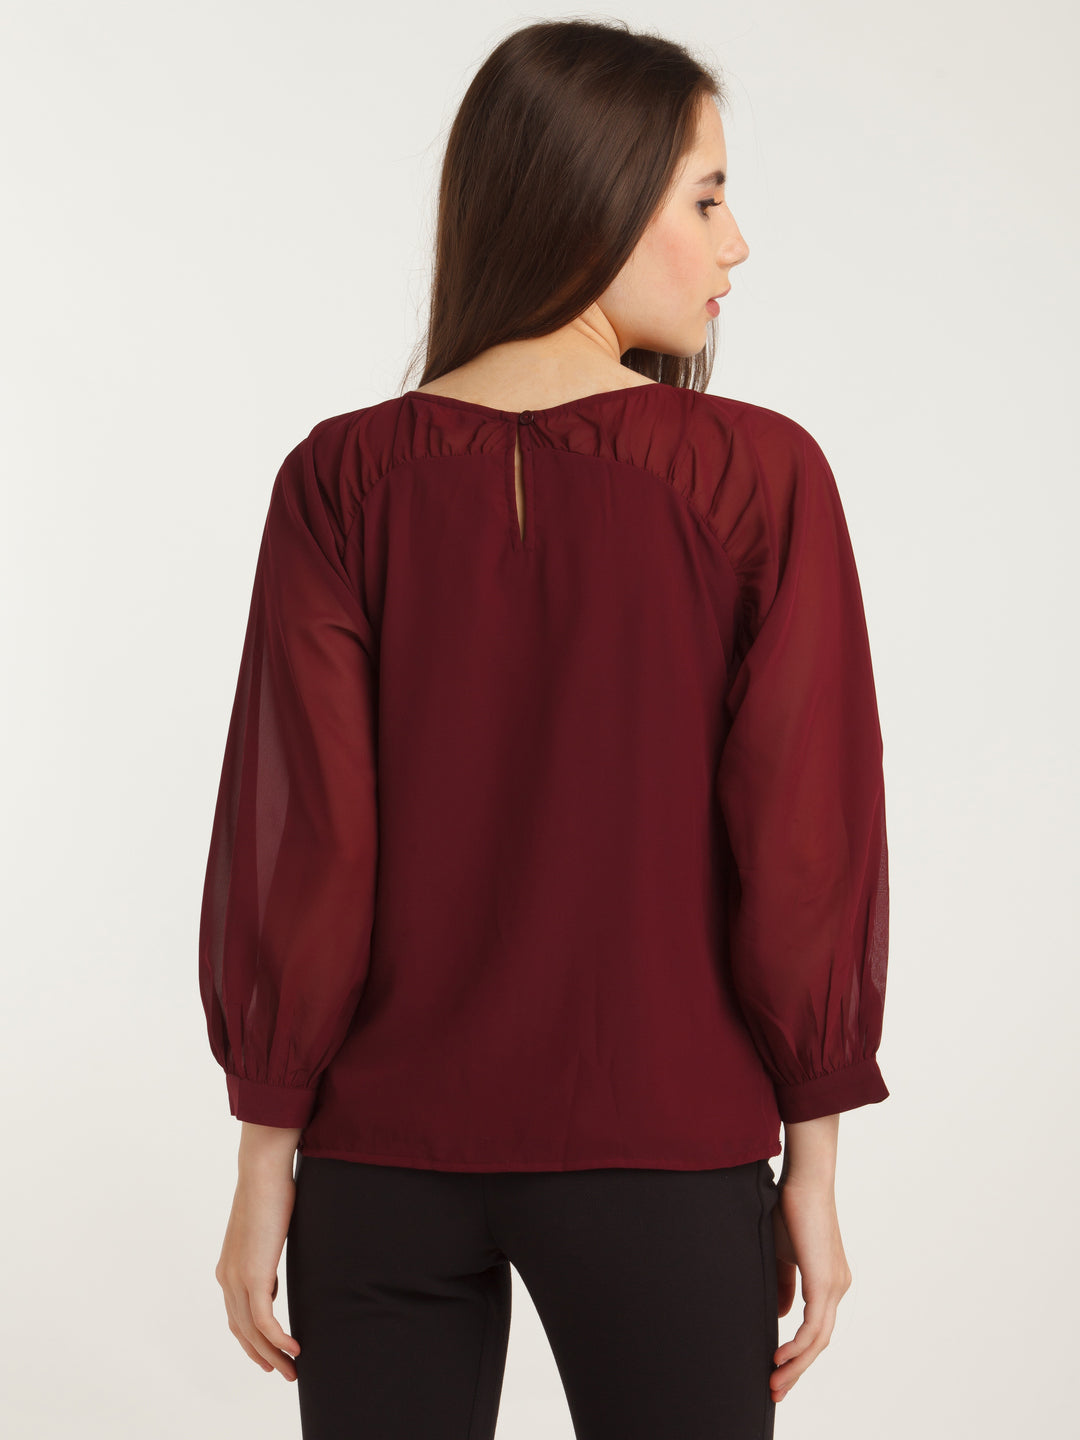 Maroon Embellished Straight Top For Women